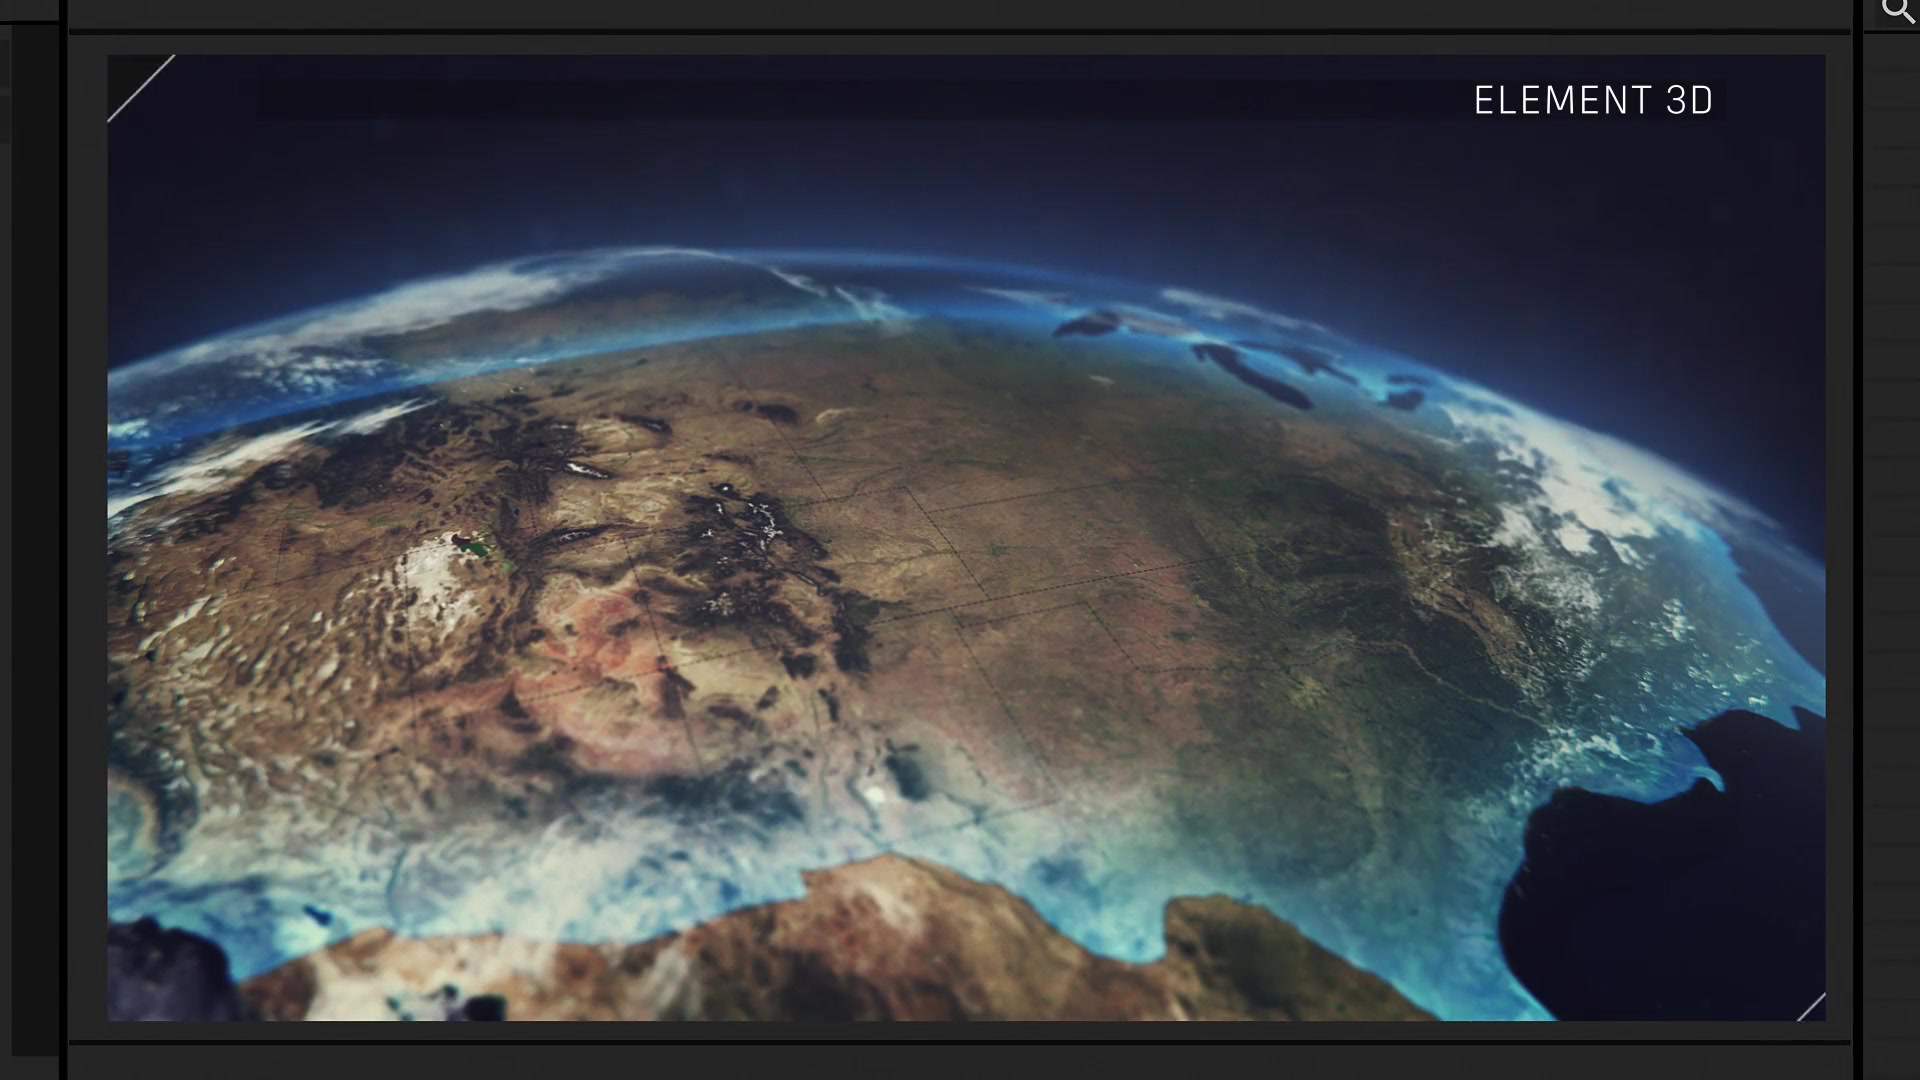 3D Interactive Earth Globe - Download Videohive 19581834